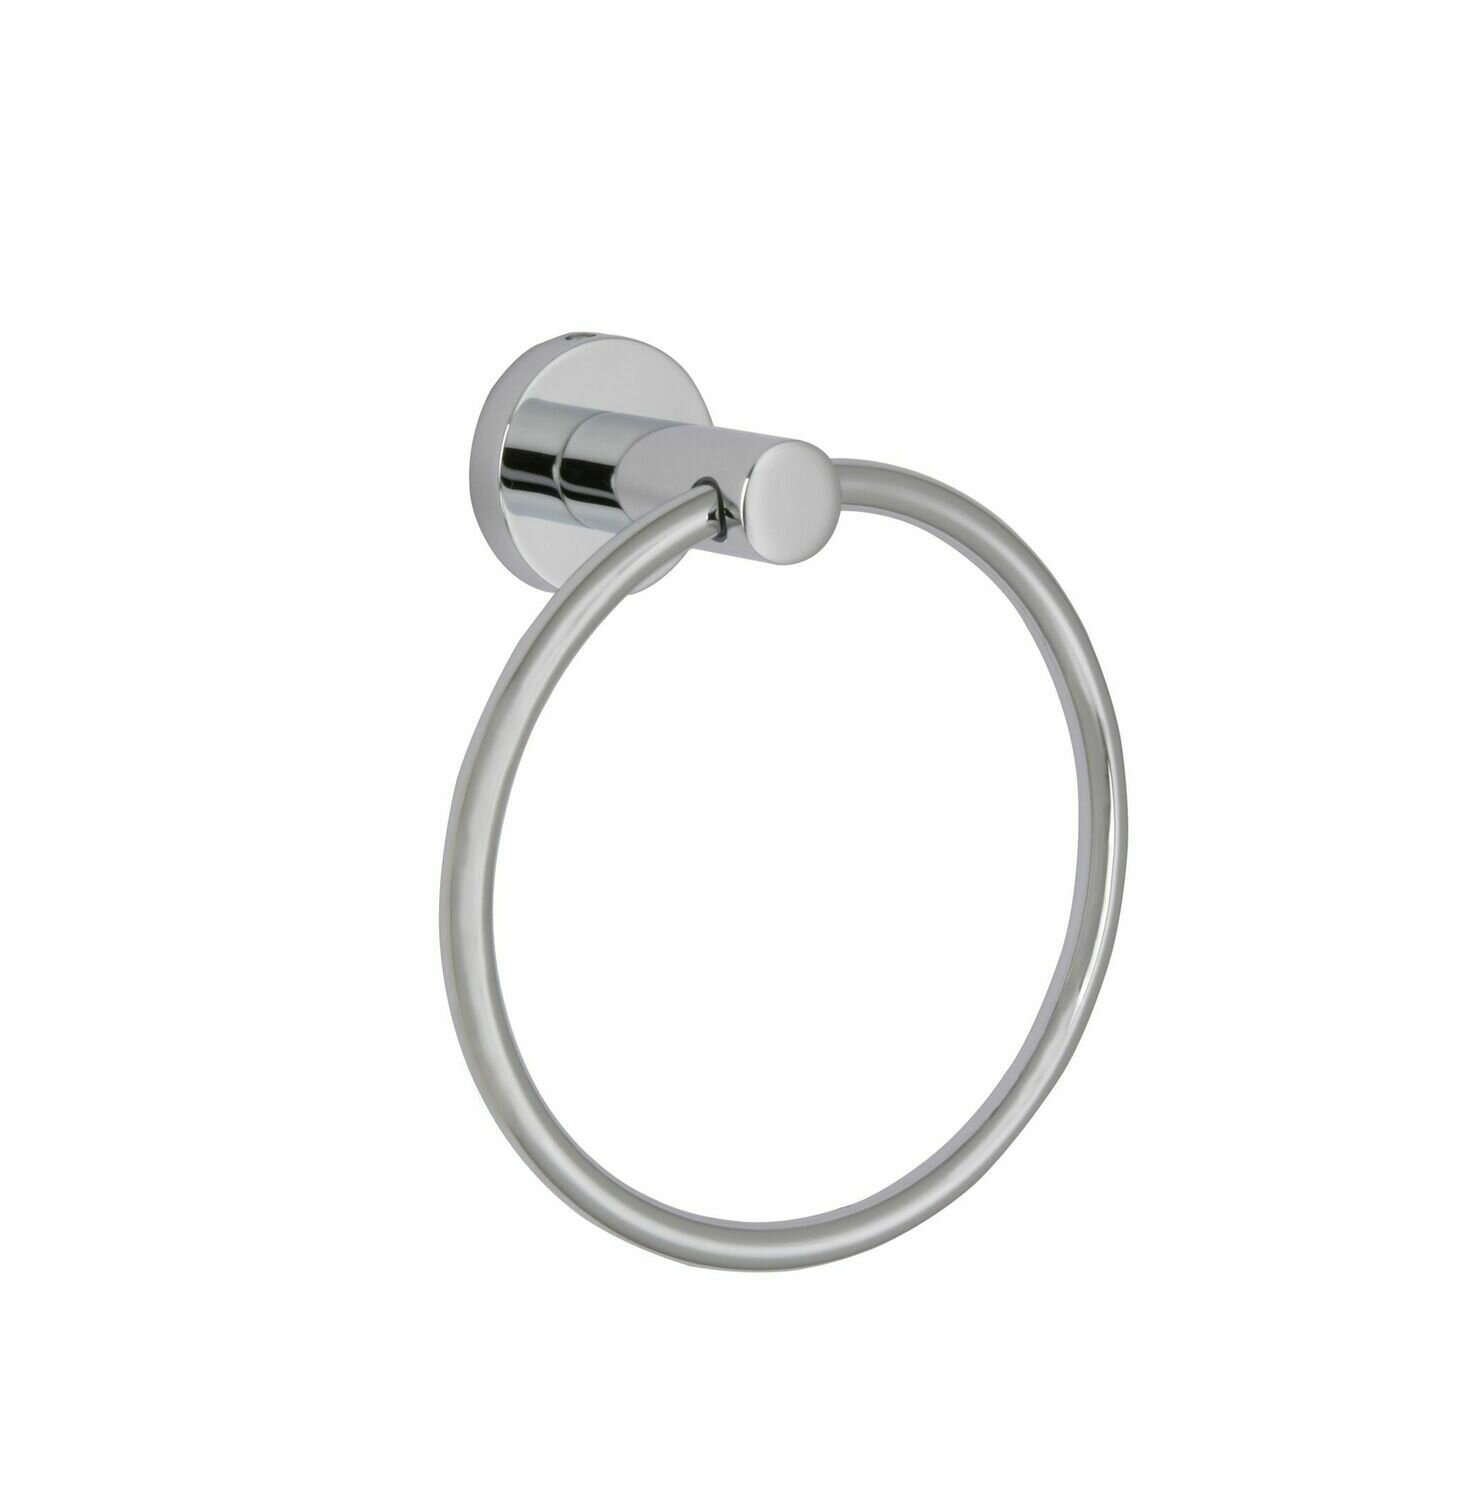 Euro Chrome Towel Ring (DISPLAY ONLY)